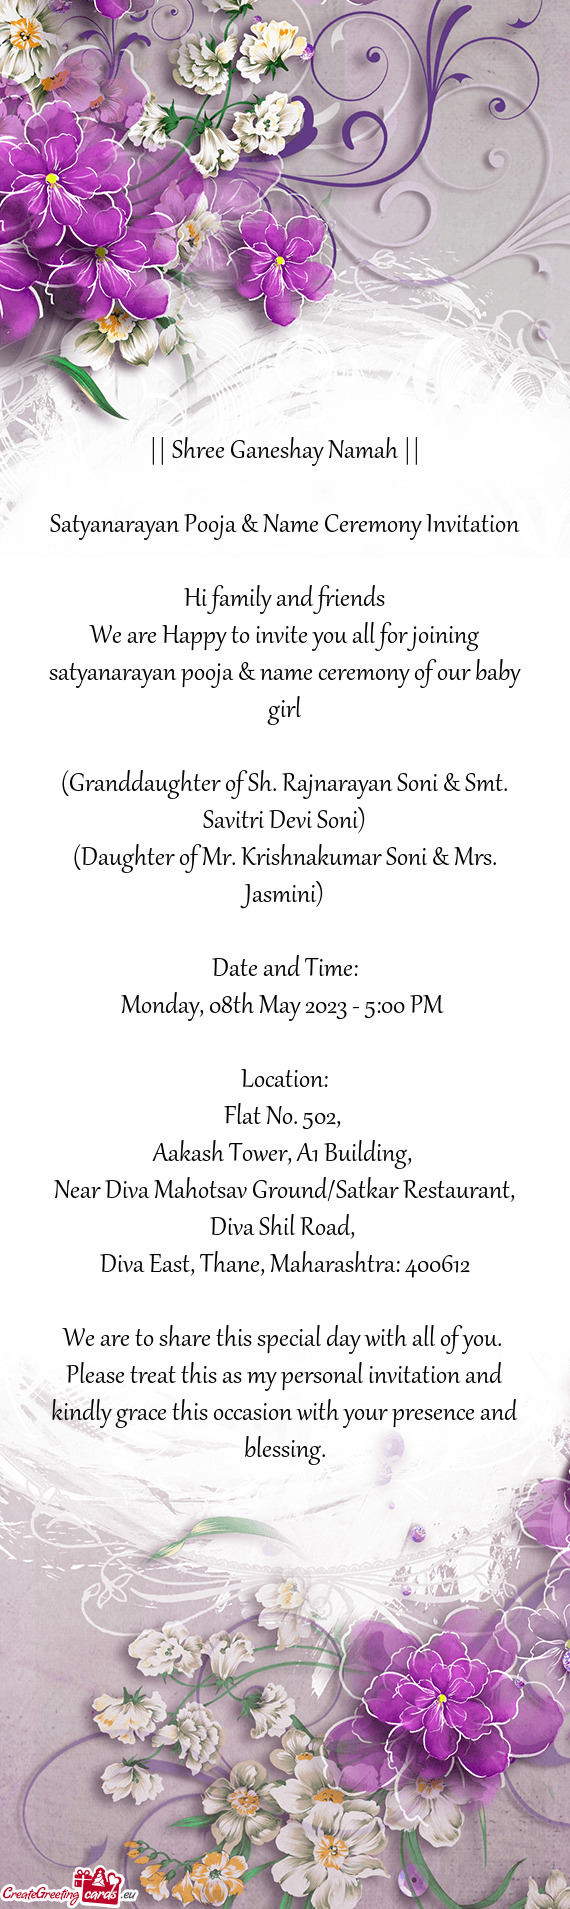 We are Happy to invite you all for joining satyanarayan pooja & name ceremony of our baby girl